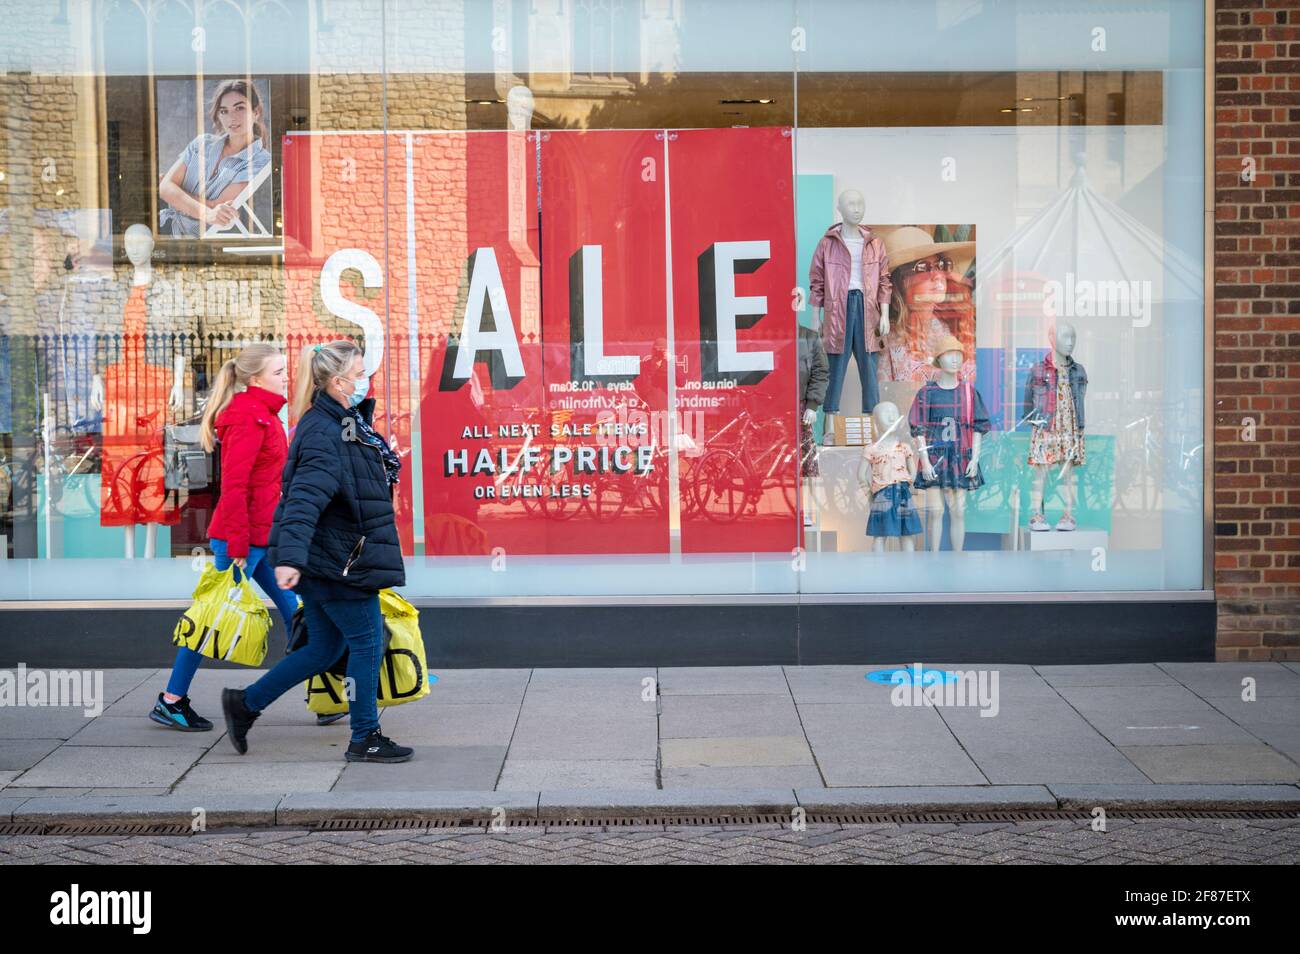 Cambridge, UK. 12th Apr, 2021. Shops reopen in Cambridge as part of the UK easing of Covid 19 lockdown restrictions. The roadmap allows opening of non essential shops across England today. It was a relatively quiet start to the morning as shoppers returned to high Street retail outlets. Credit: Julian Eales/Alamy Live News Stock Photo